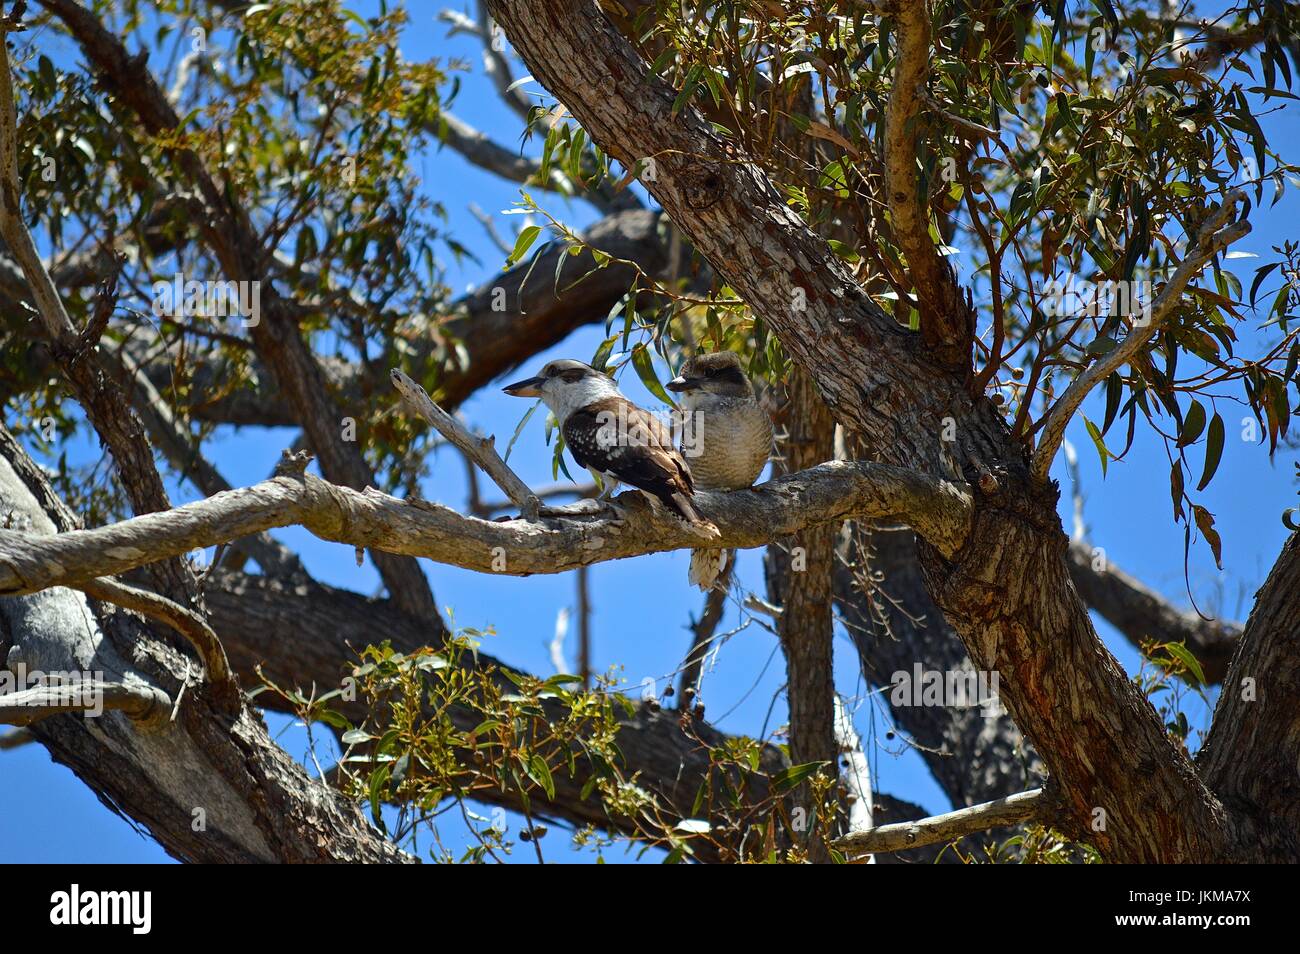 Parent kookaburra and it's chick in a tree together Stock Photo